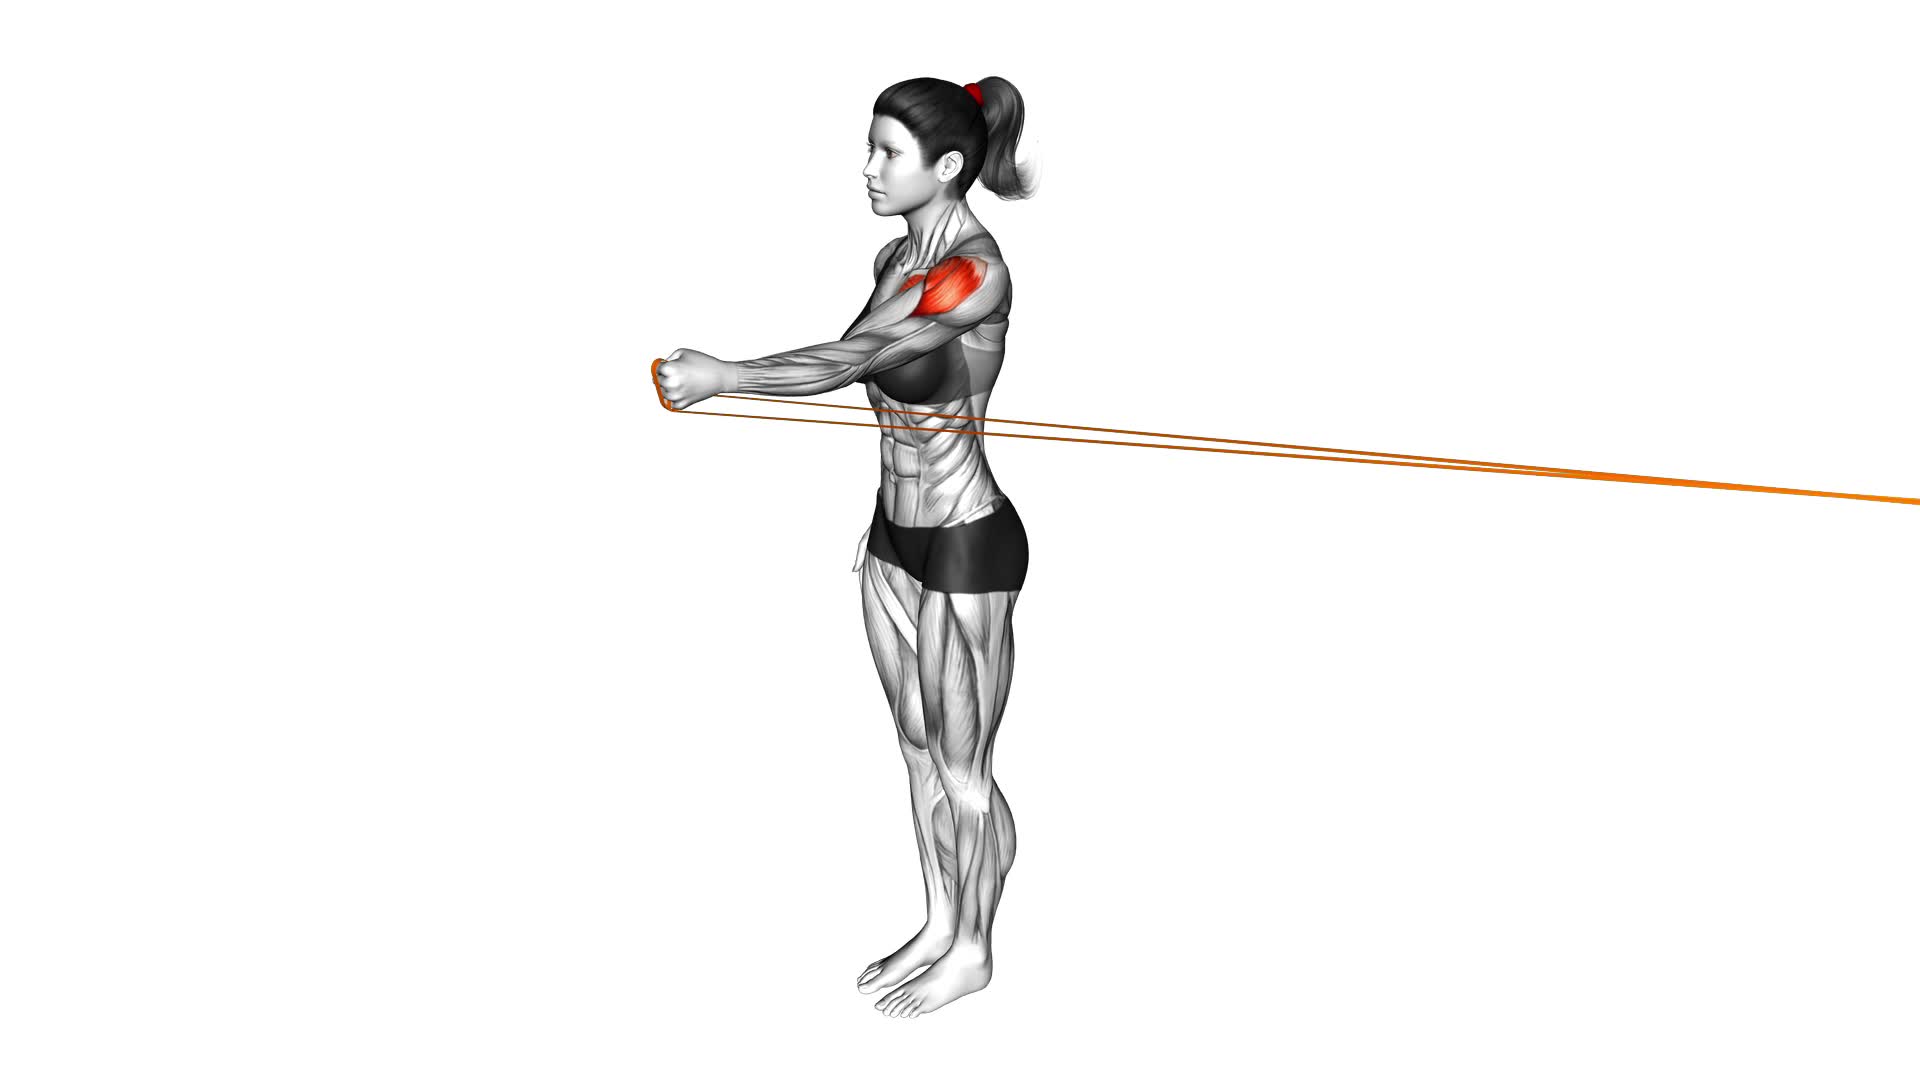 Resistance Band Standing Single Arm Shoulder Flexion (female) - Video Exercise Guide & Tips